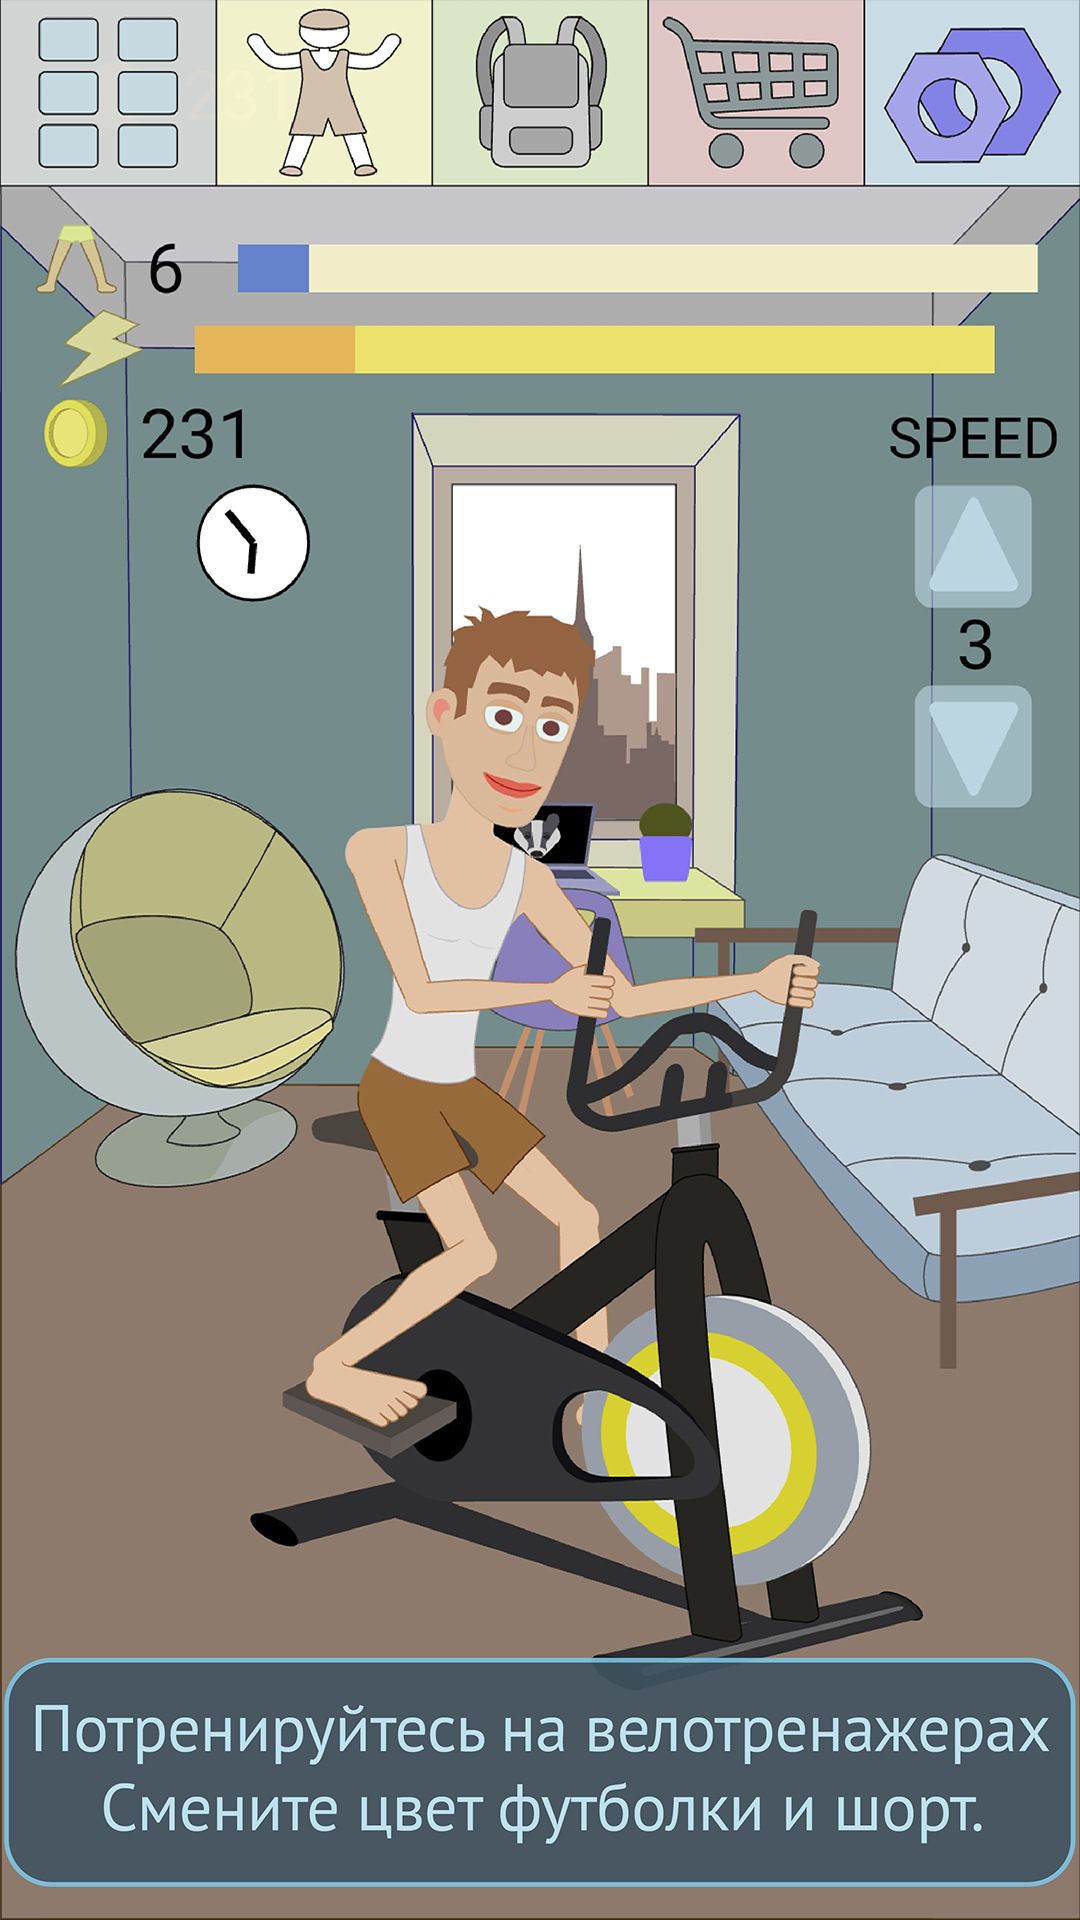 Muscle clicker 2: RPG Gym game